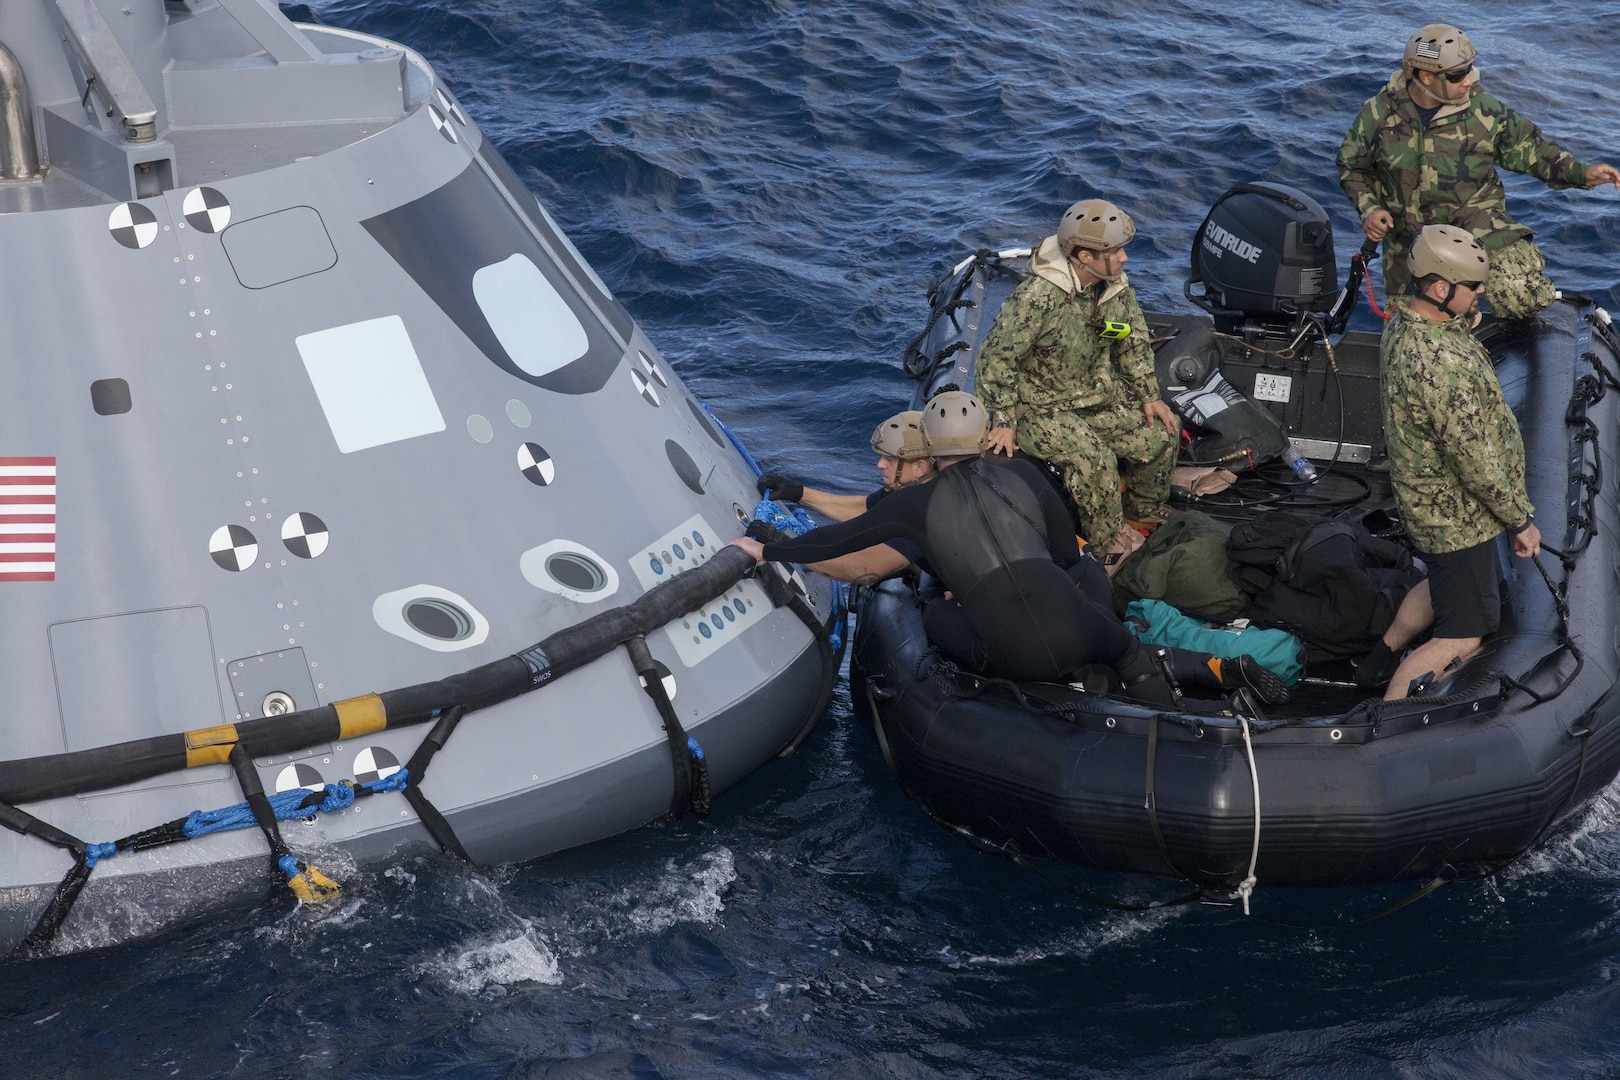 U.S. Navy divers and other personnel in a Zodiac boat secure a harness around a test version of the Orion crew module during Underway Recovery Test 5 in the Pacific Ocean off the coast of California on Oct. 28, 2016. Members of the New York Air National Guard's 106th Rescue Wing will participate in a mission in Hawaii designed to test space capsule recovery techniques and equipment, although they will not work with a capsule simulator like this one.Orion is the exploration spacecraft designed to carry astronauts to destinations not yet explored by humans. 